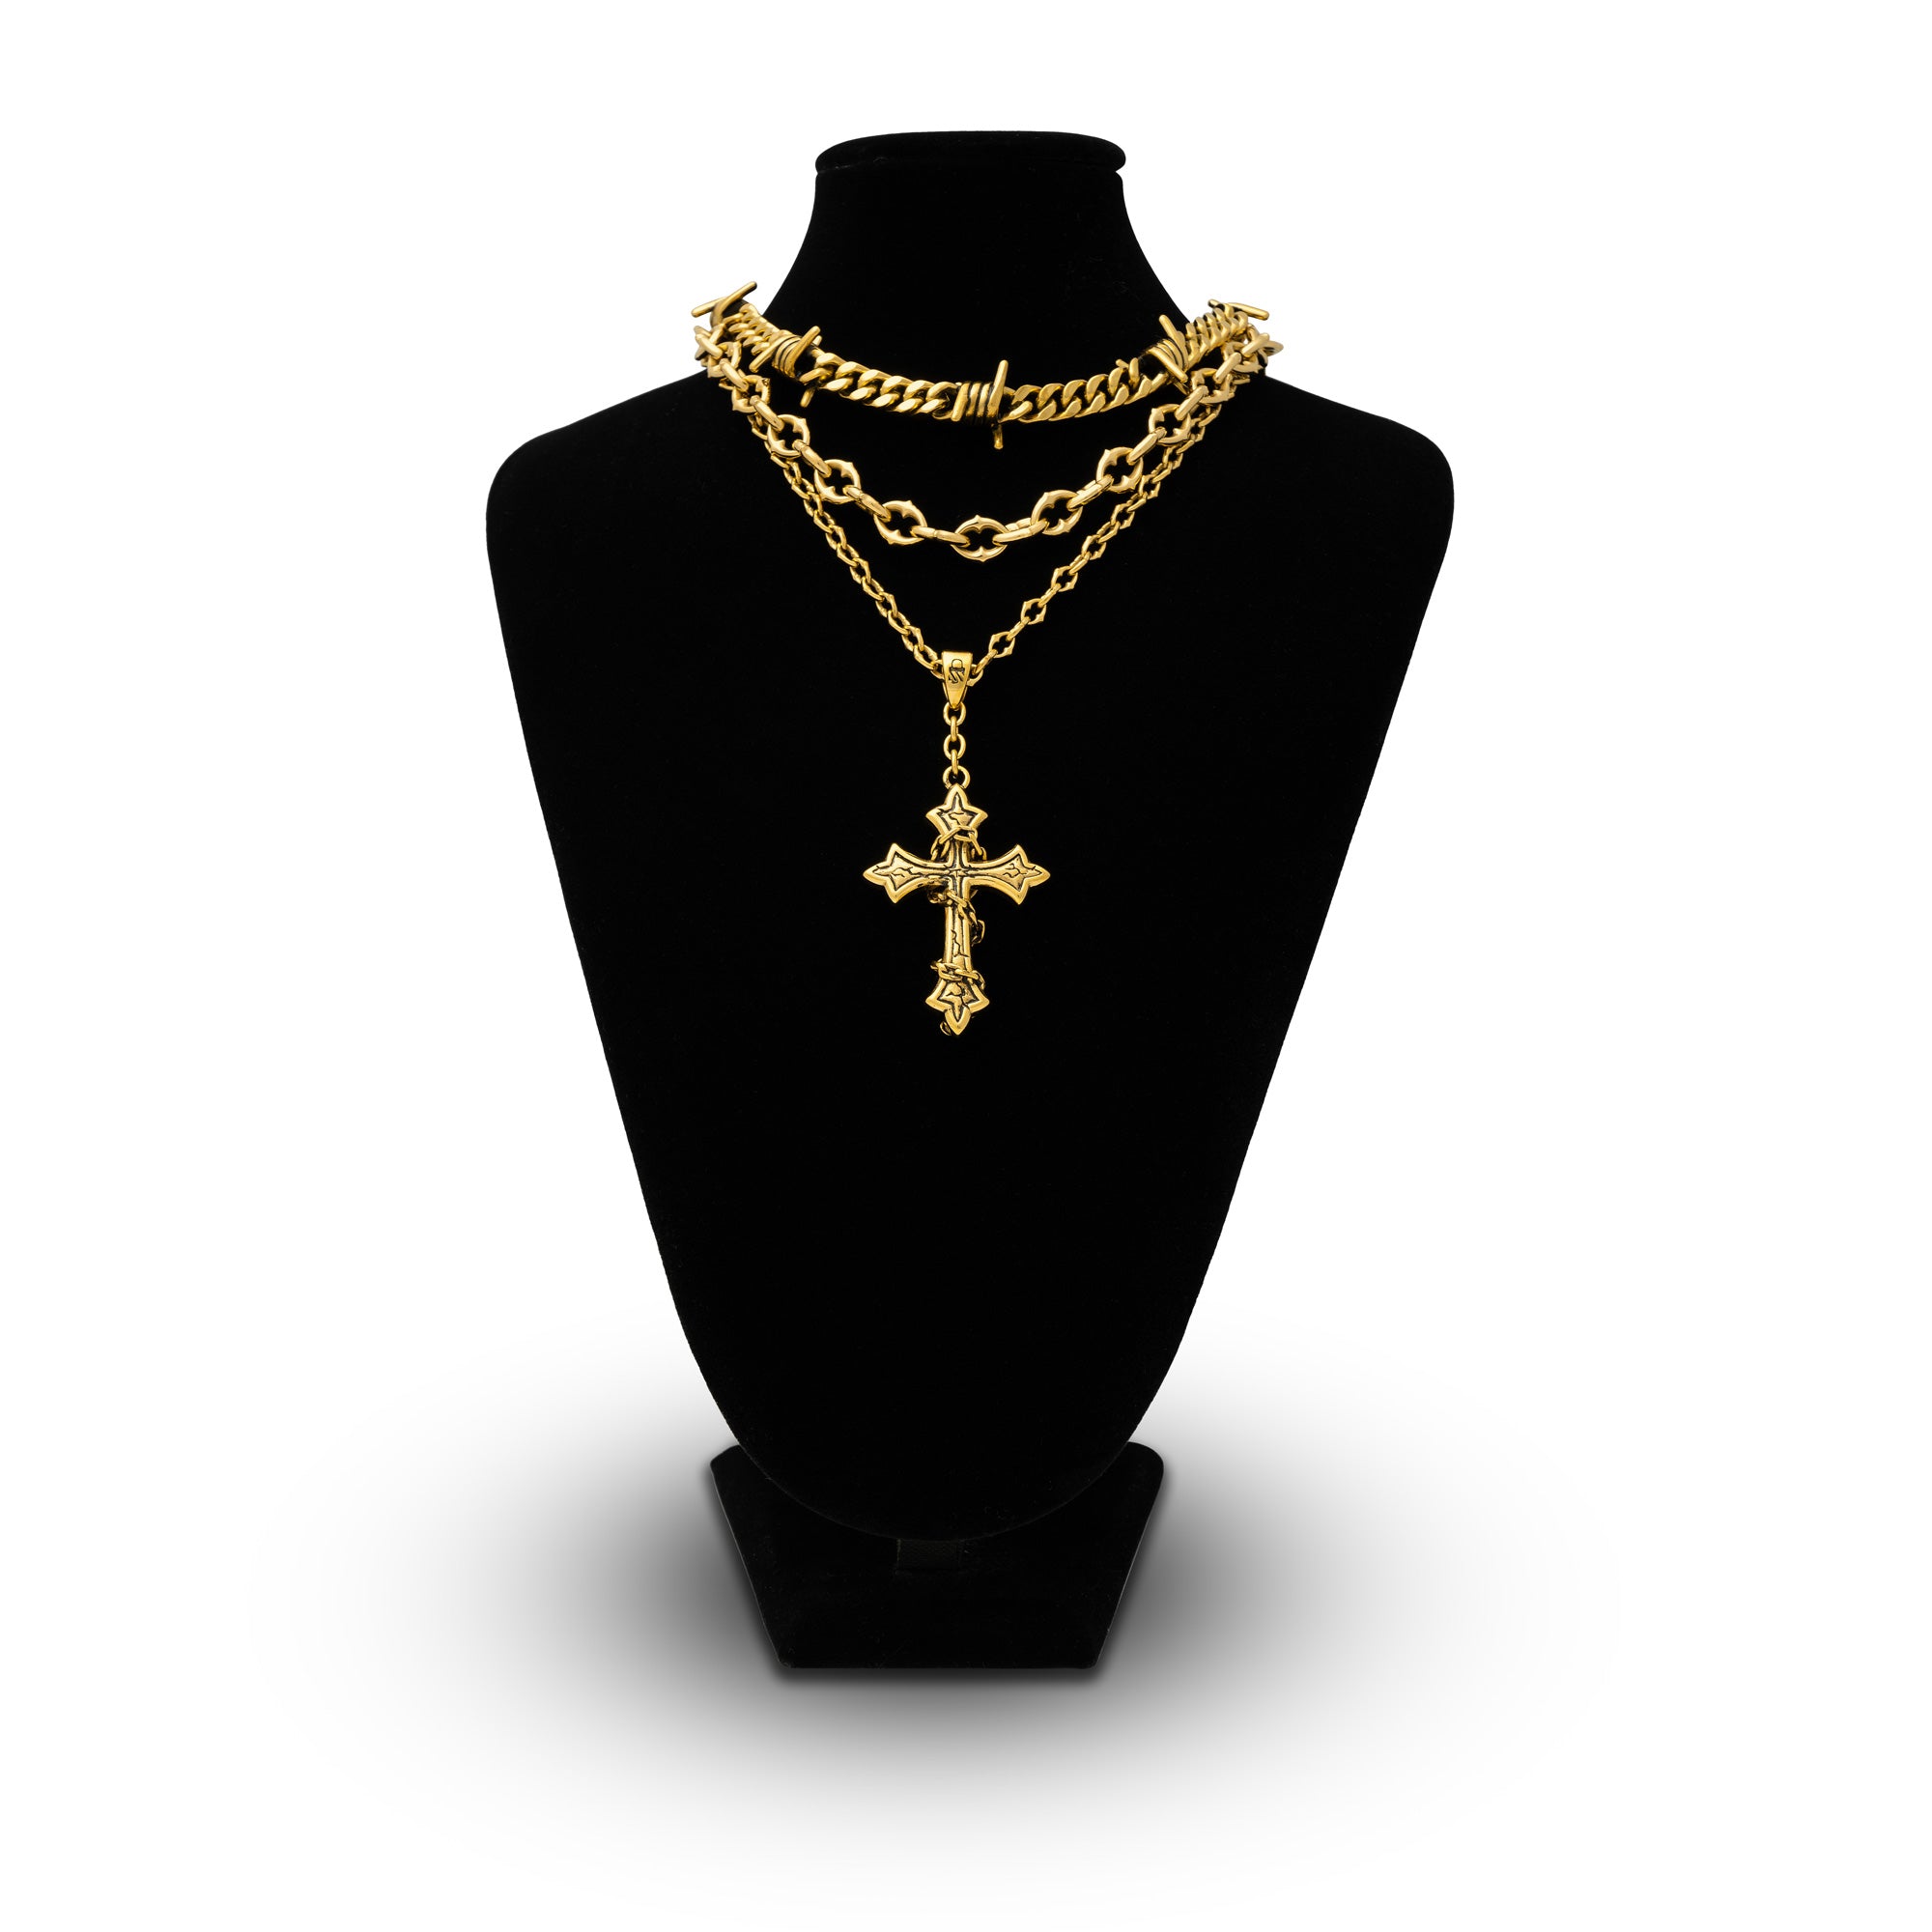 Gold chain set with barbed wire chain and spiked jewelry with cross pendant by Statement Collective